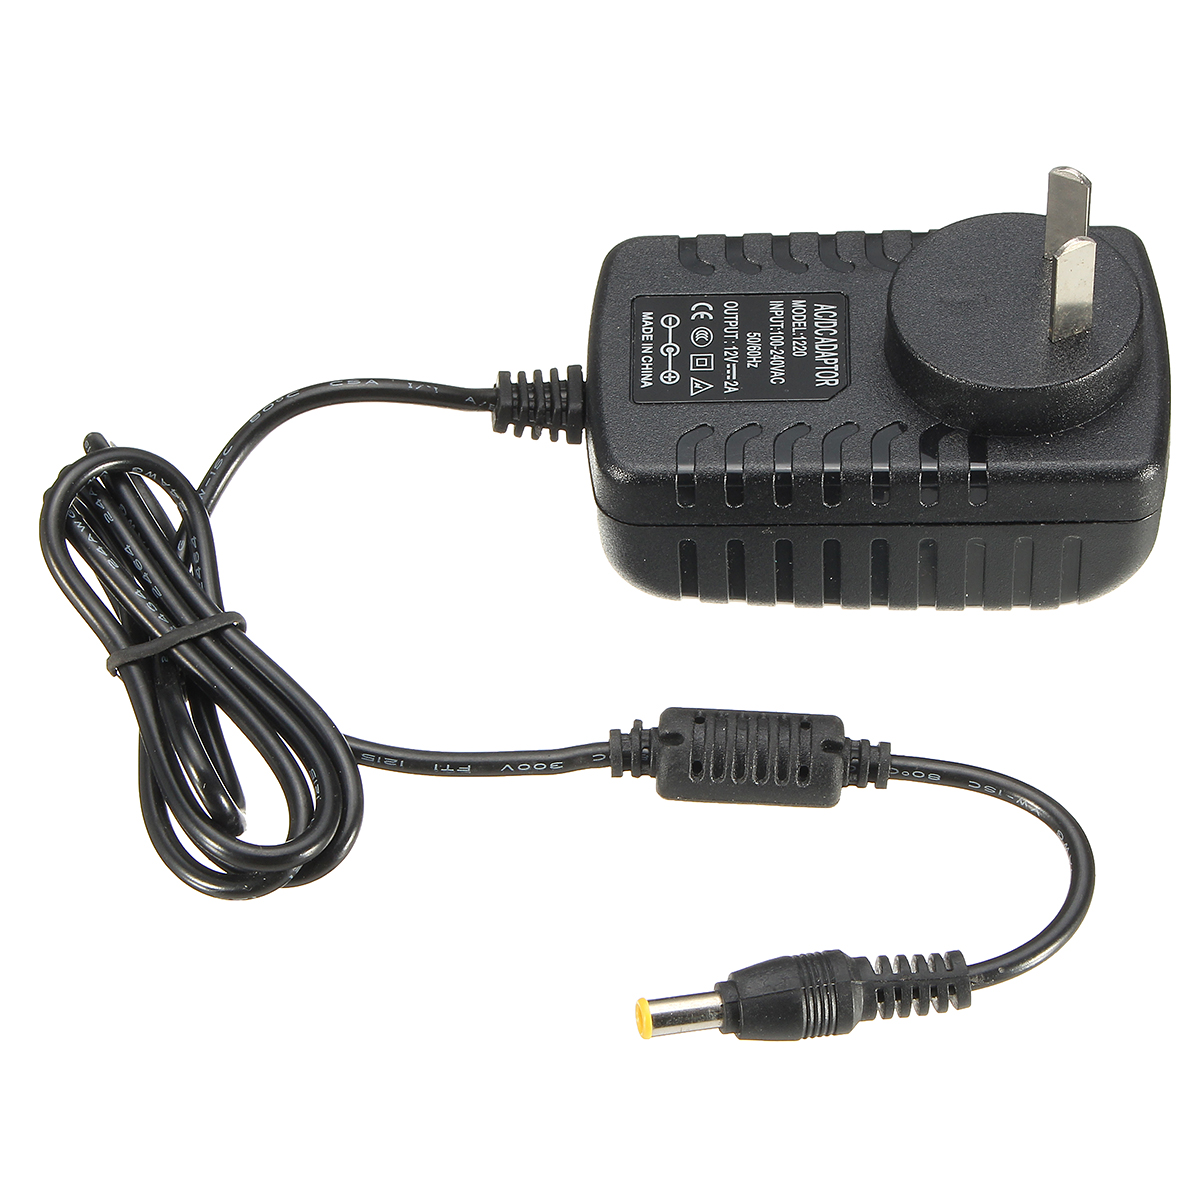 12V-2A-Adapter-for-Makita-BMR100-BMR101-JobSite-Radio-Switching-Power-Supply-Cord-Wall-Plug-Charger-1363818-5